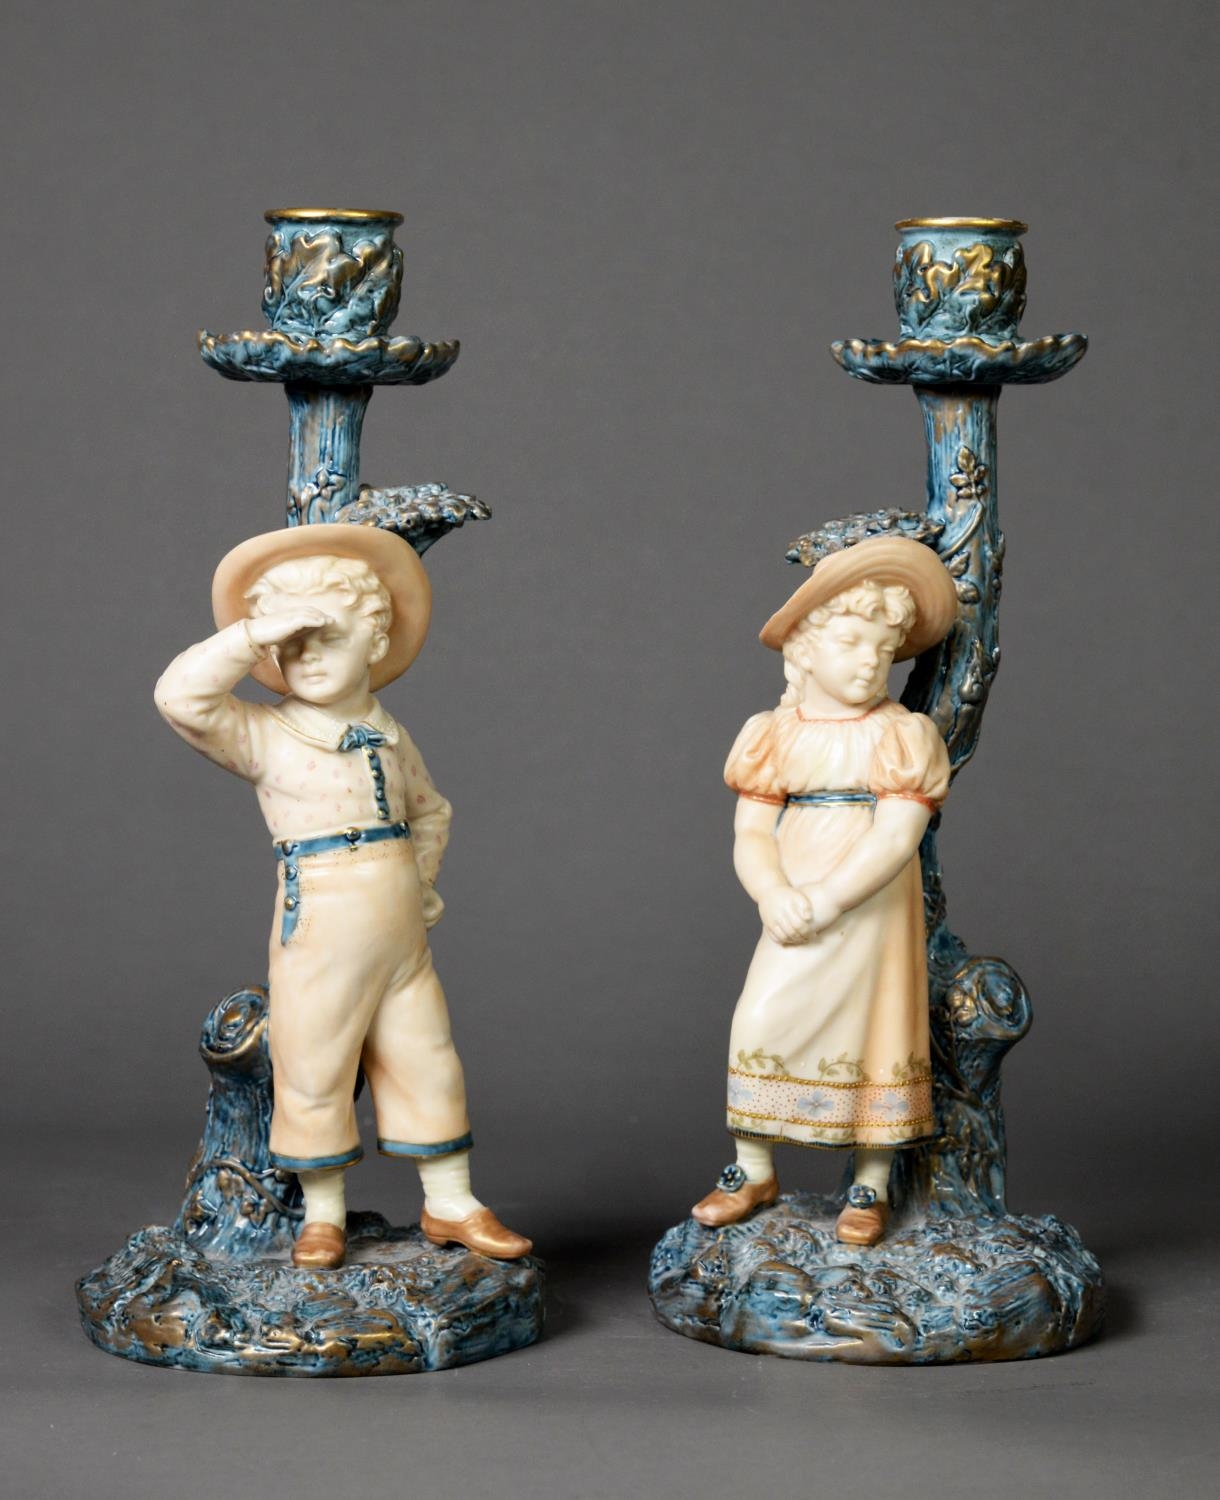 LATE NINETEENTH CENTURY PAIR OF ROYAL WORCESTER PORCELAIN FIGURAL CANDLESTICKS each painted in muted